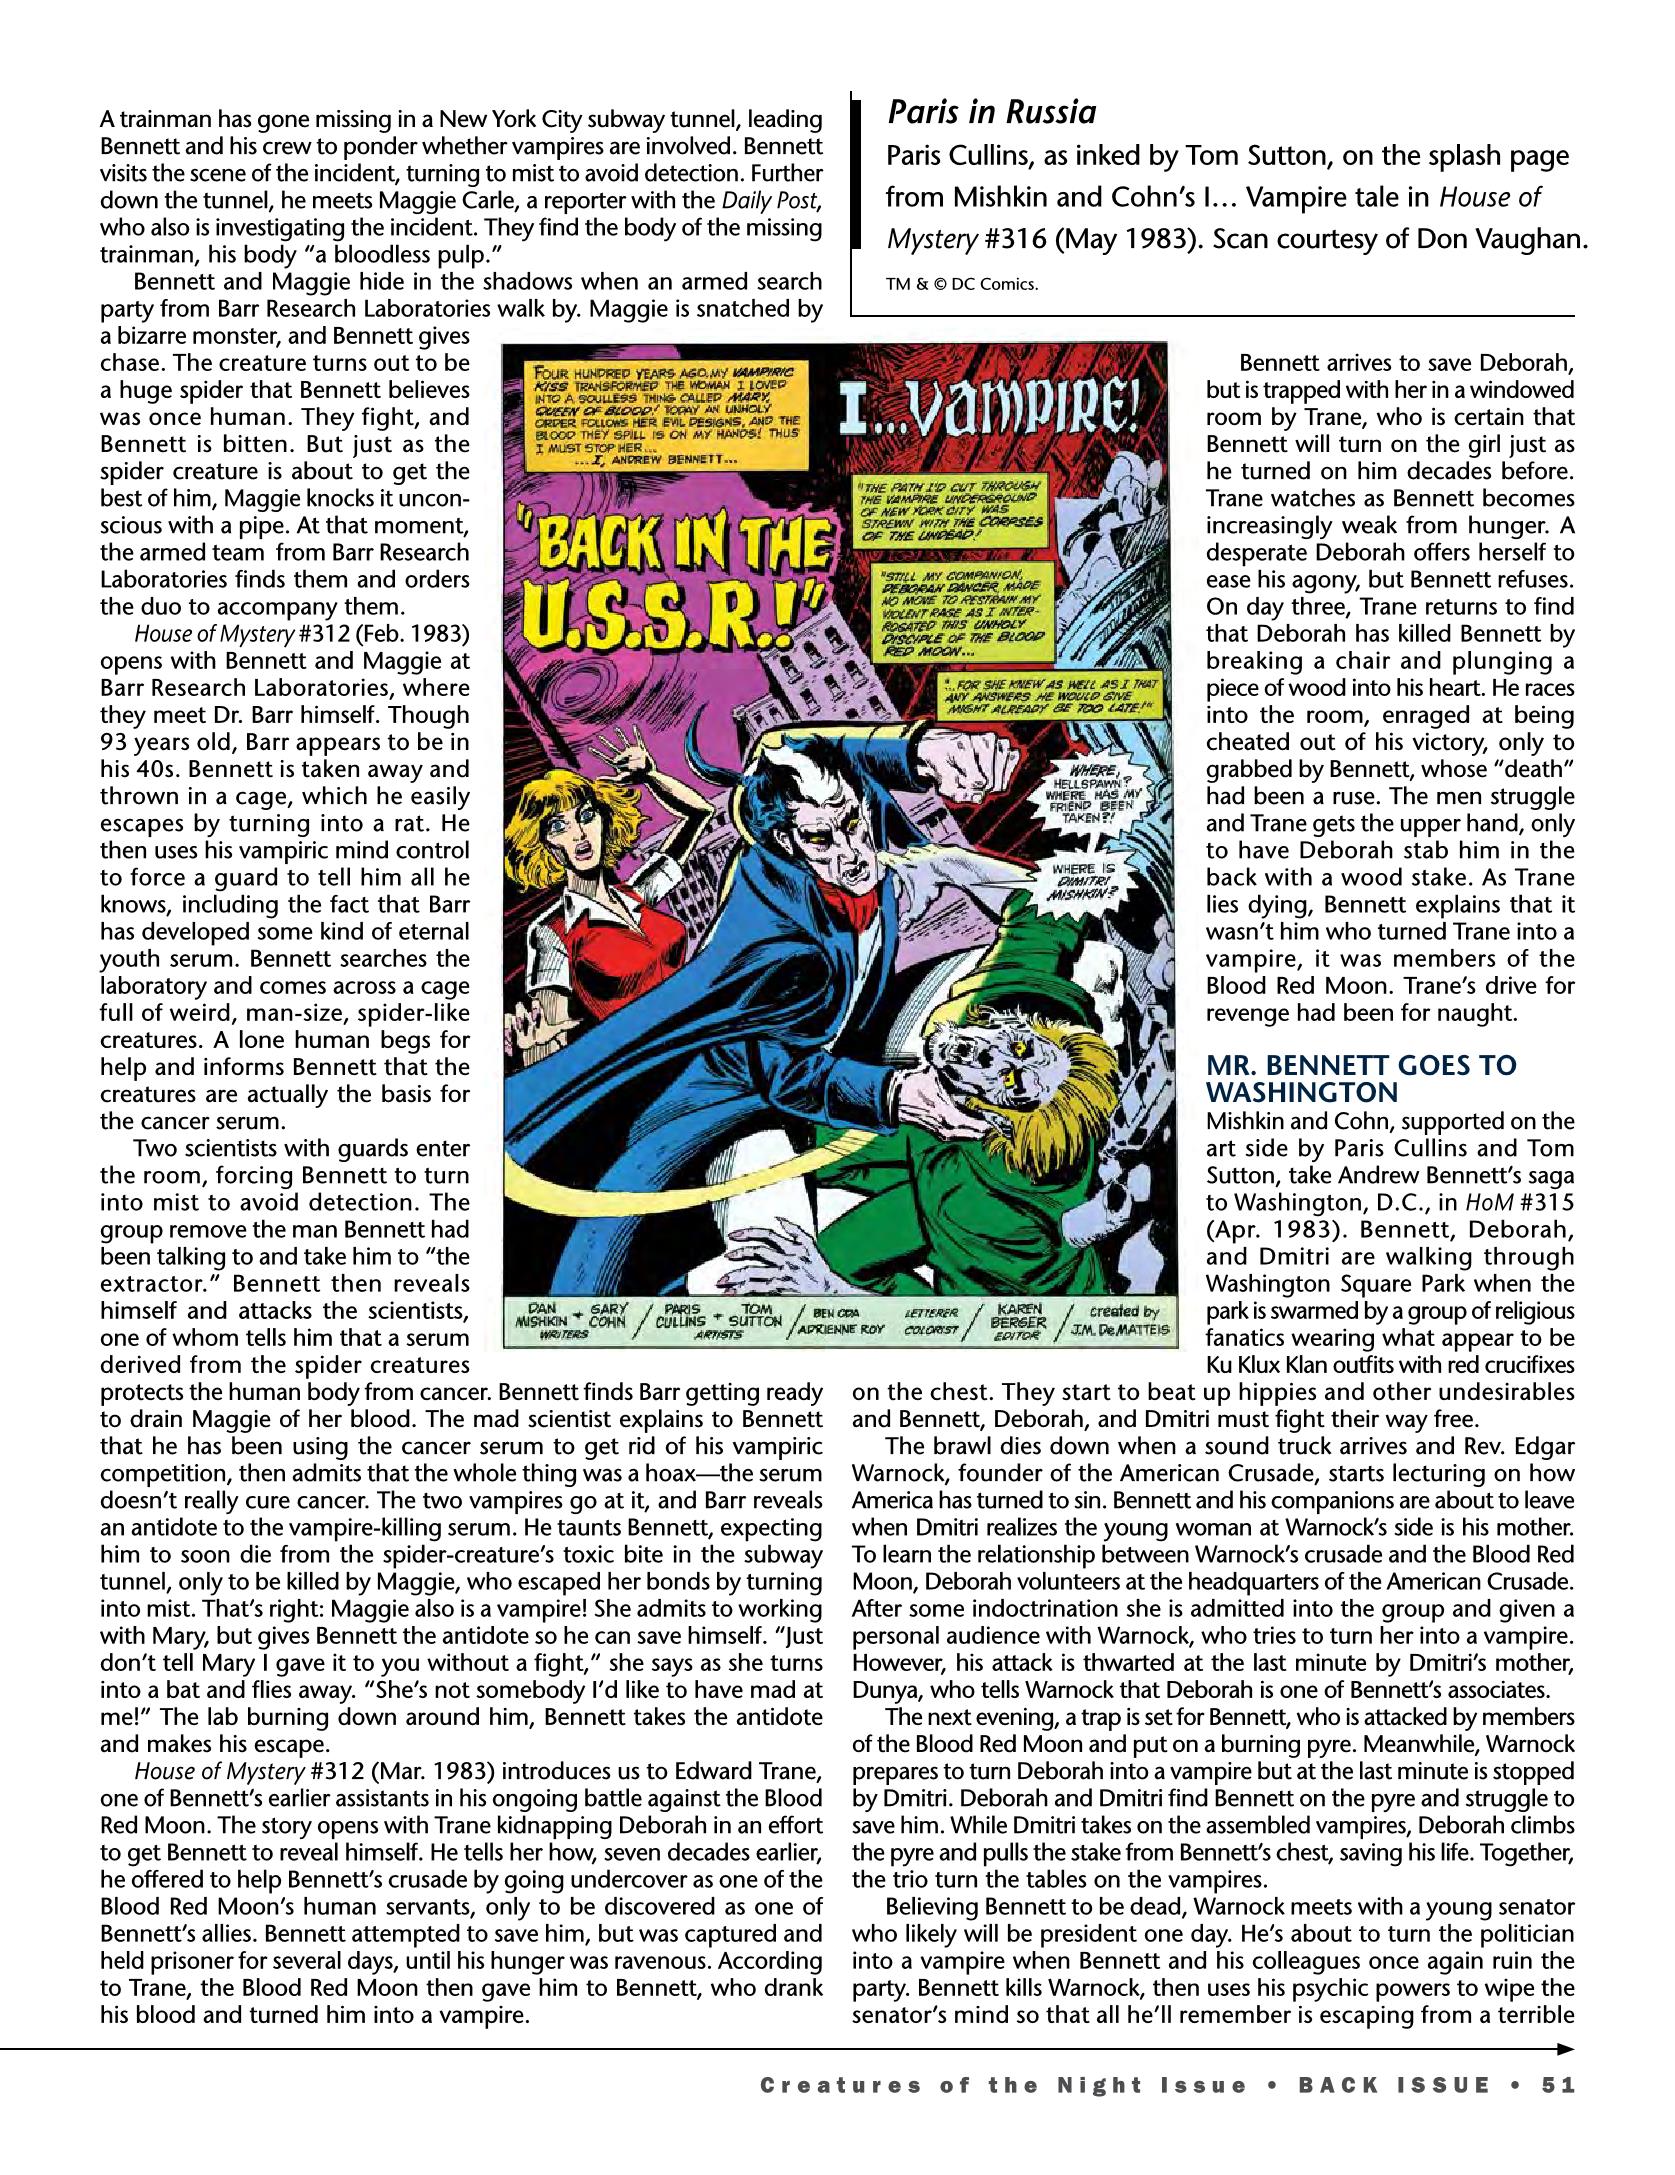 Read online Back Issue comic -  Issue #95 - 49